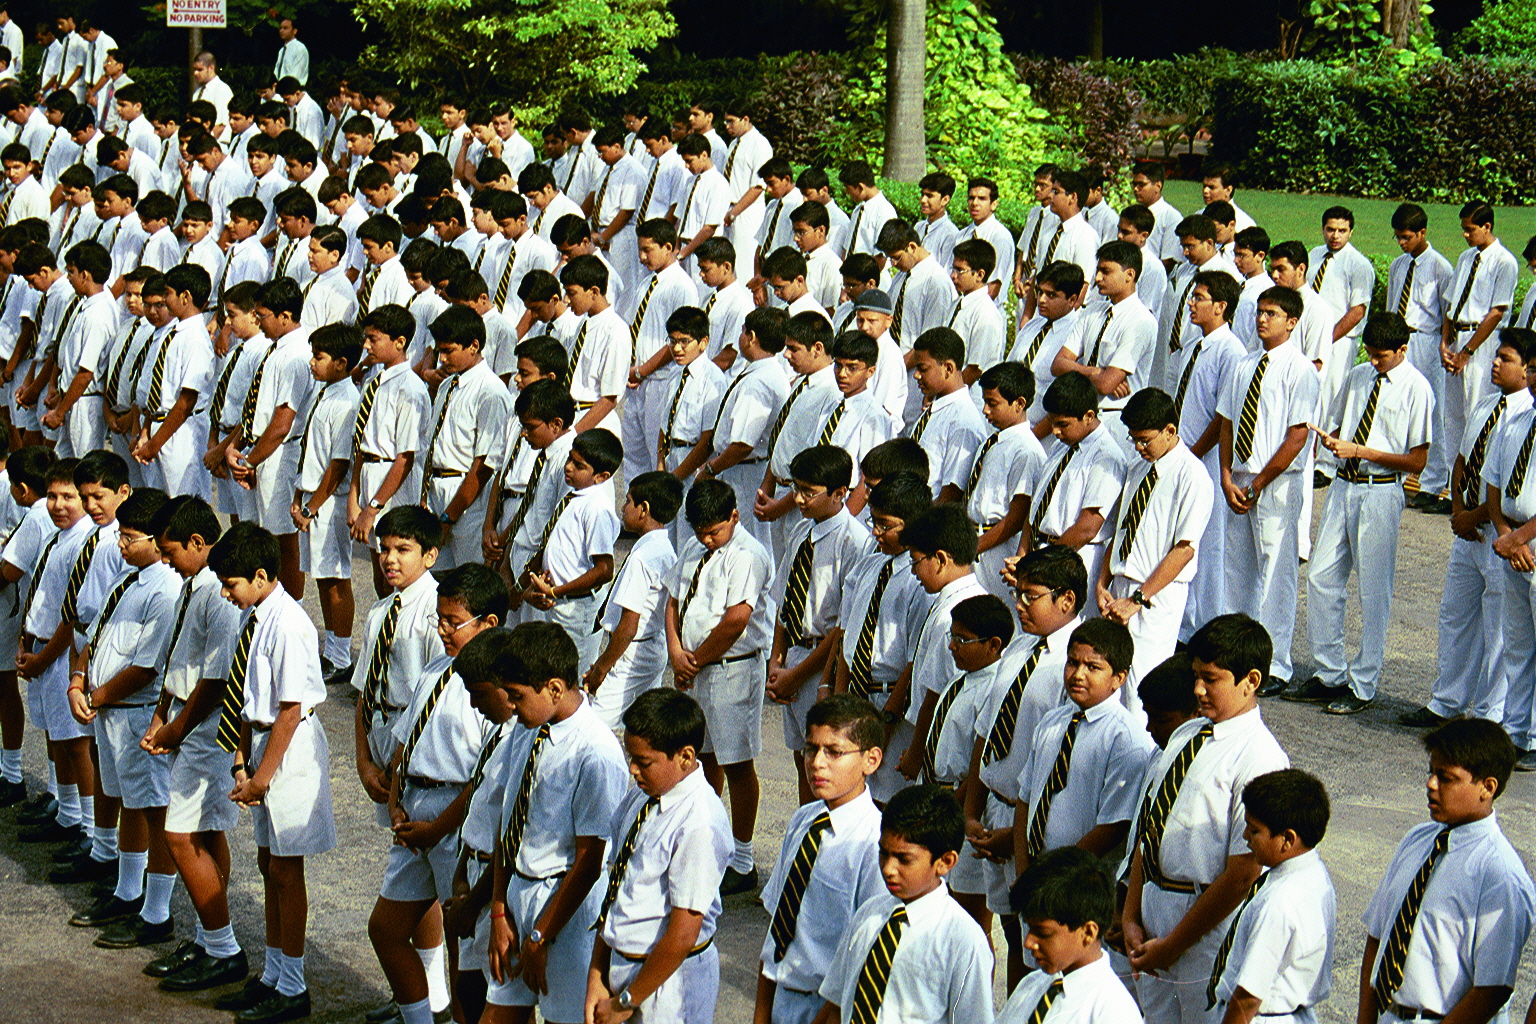 Students awaiting daily morning inspections, by the house prefects after Chapel